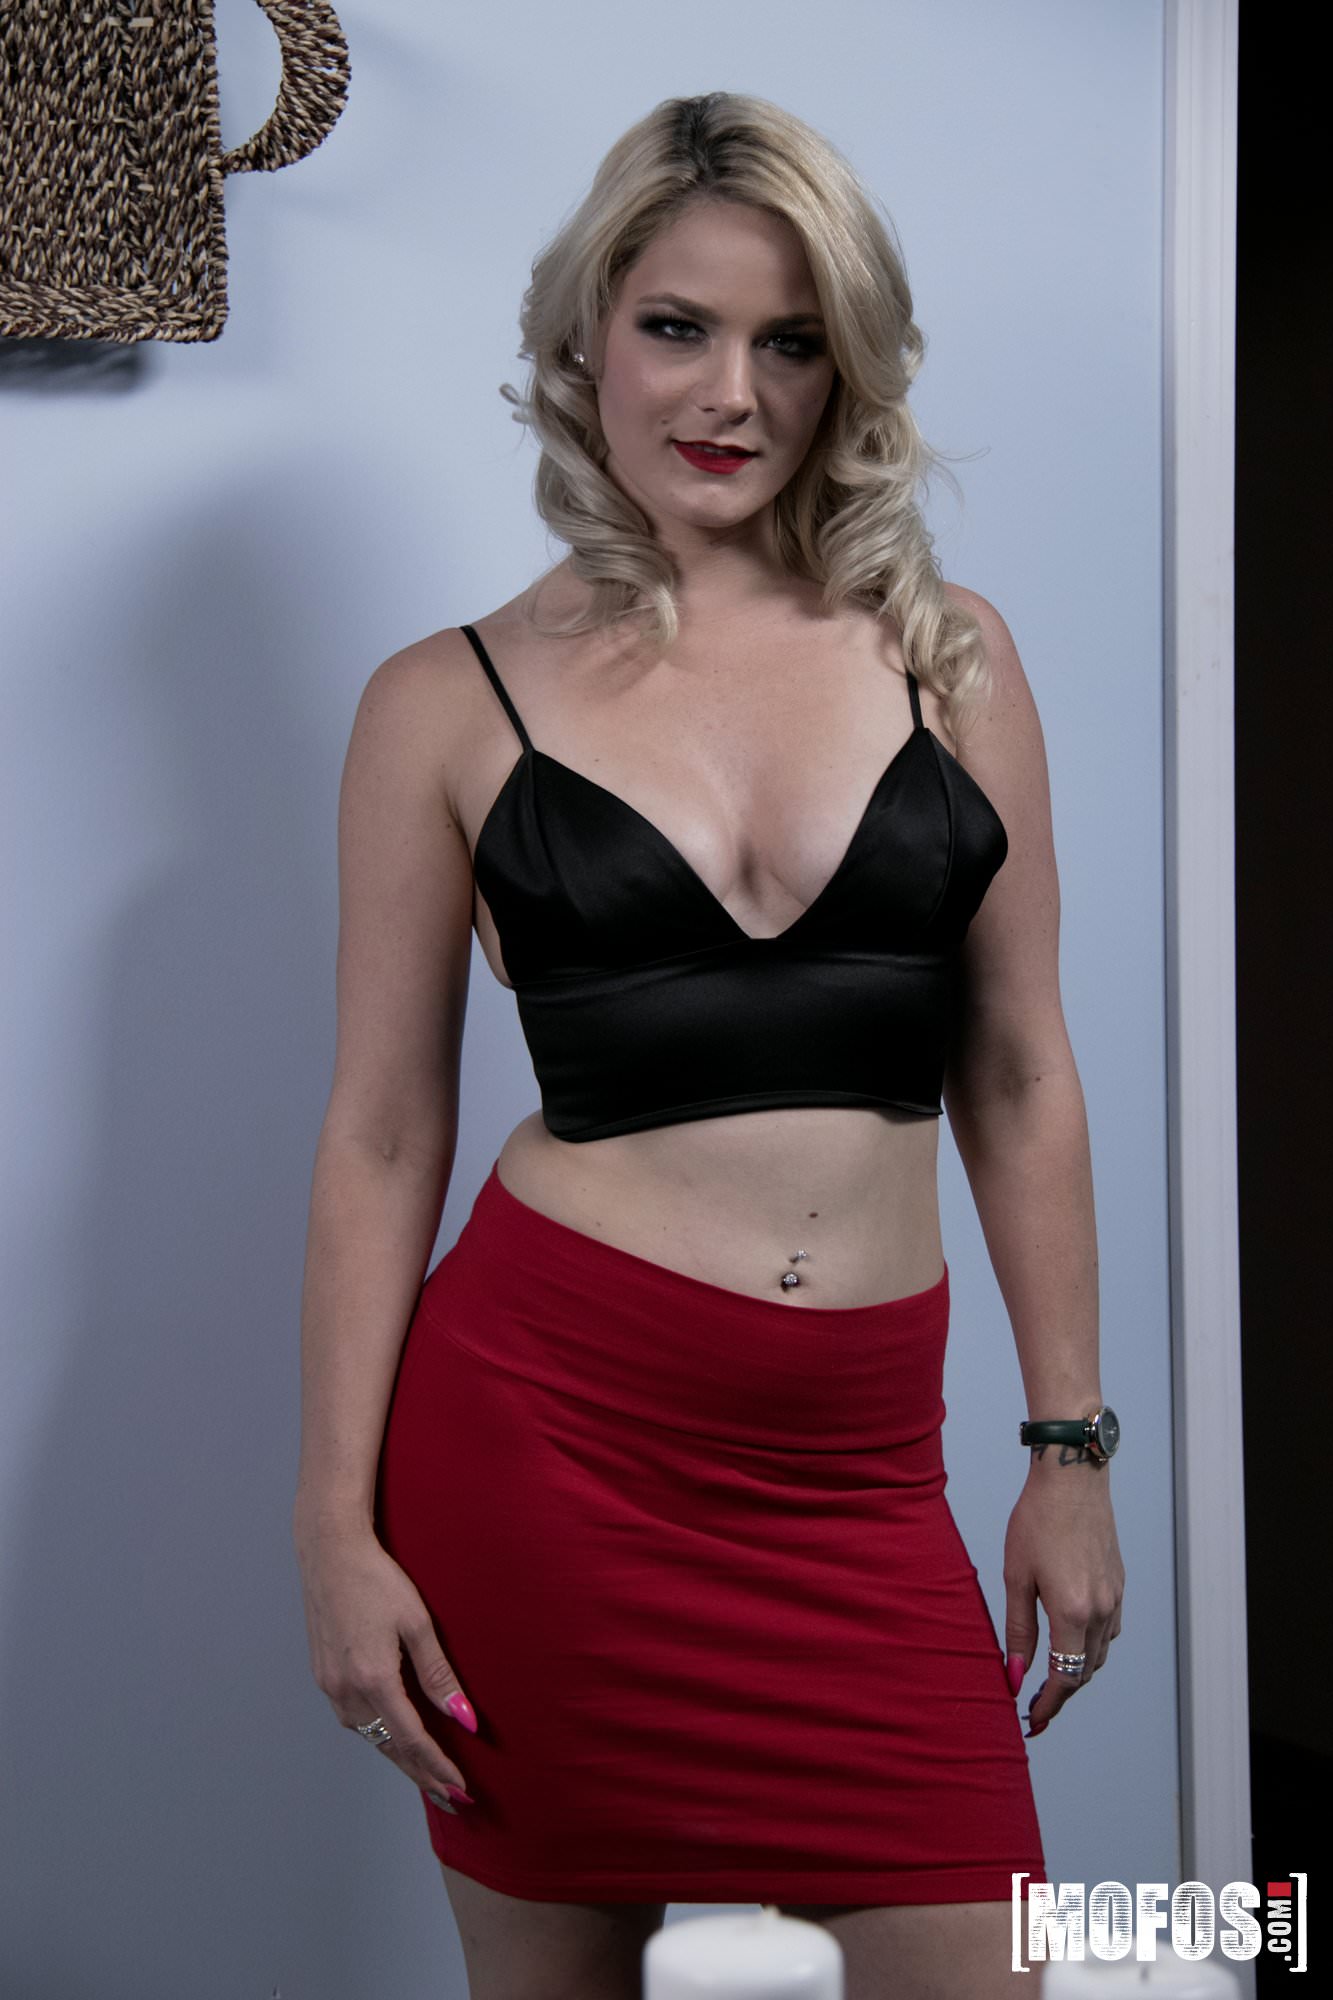 Mofos 'Late For His Date' starring Lisey Sweet (Photo 1)